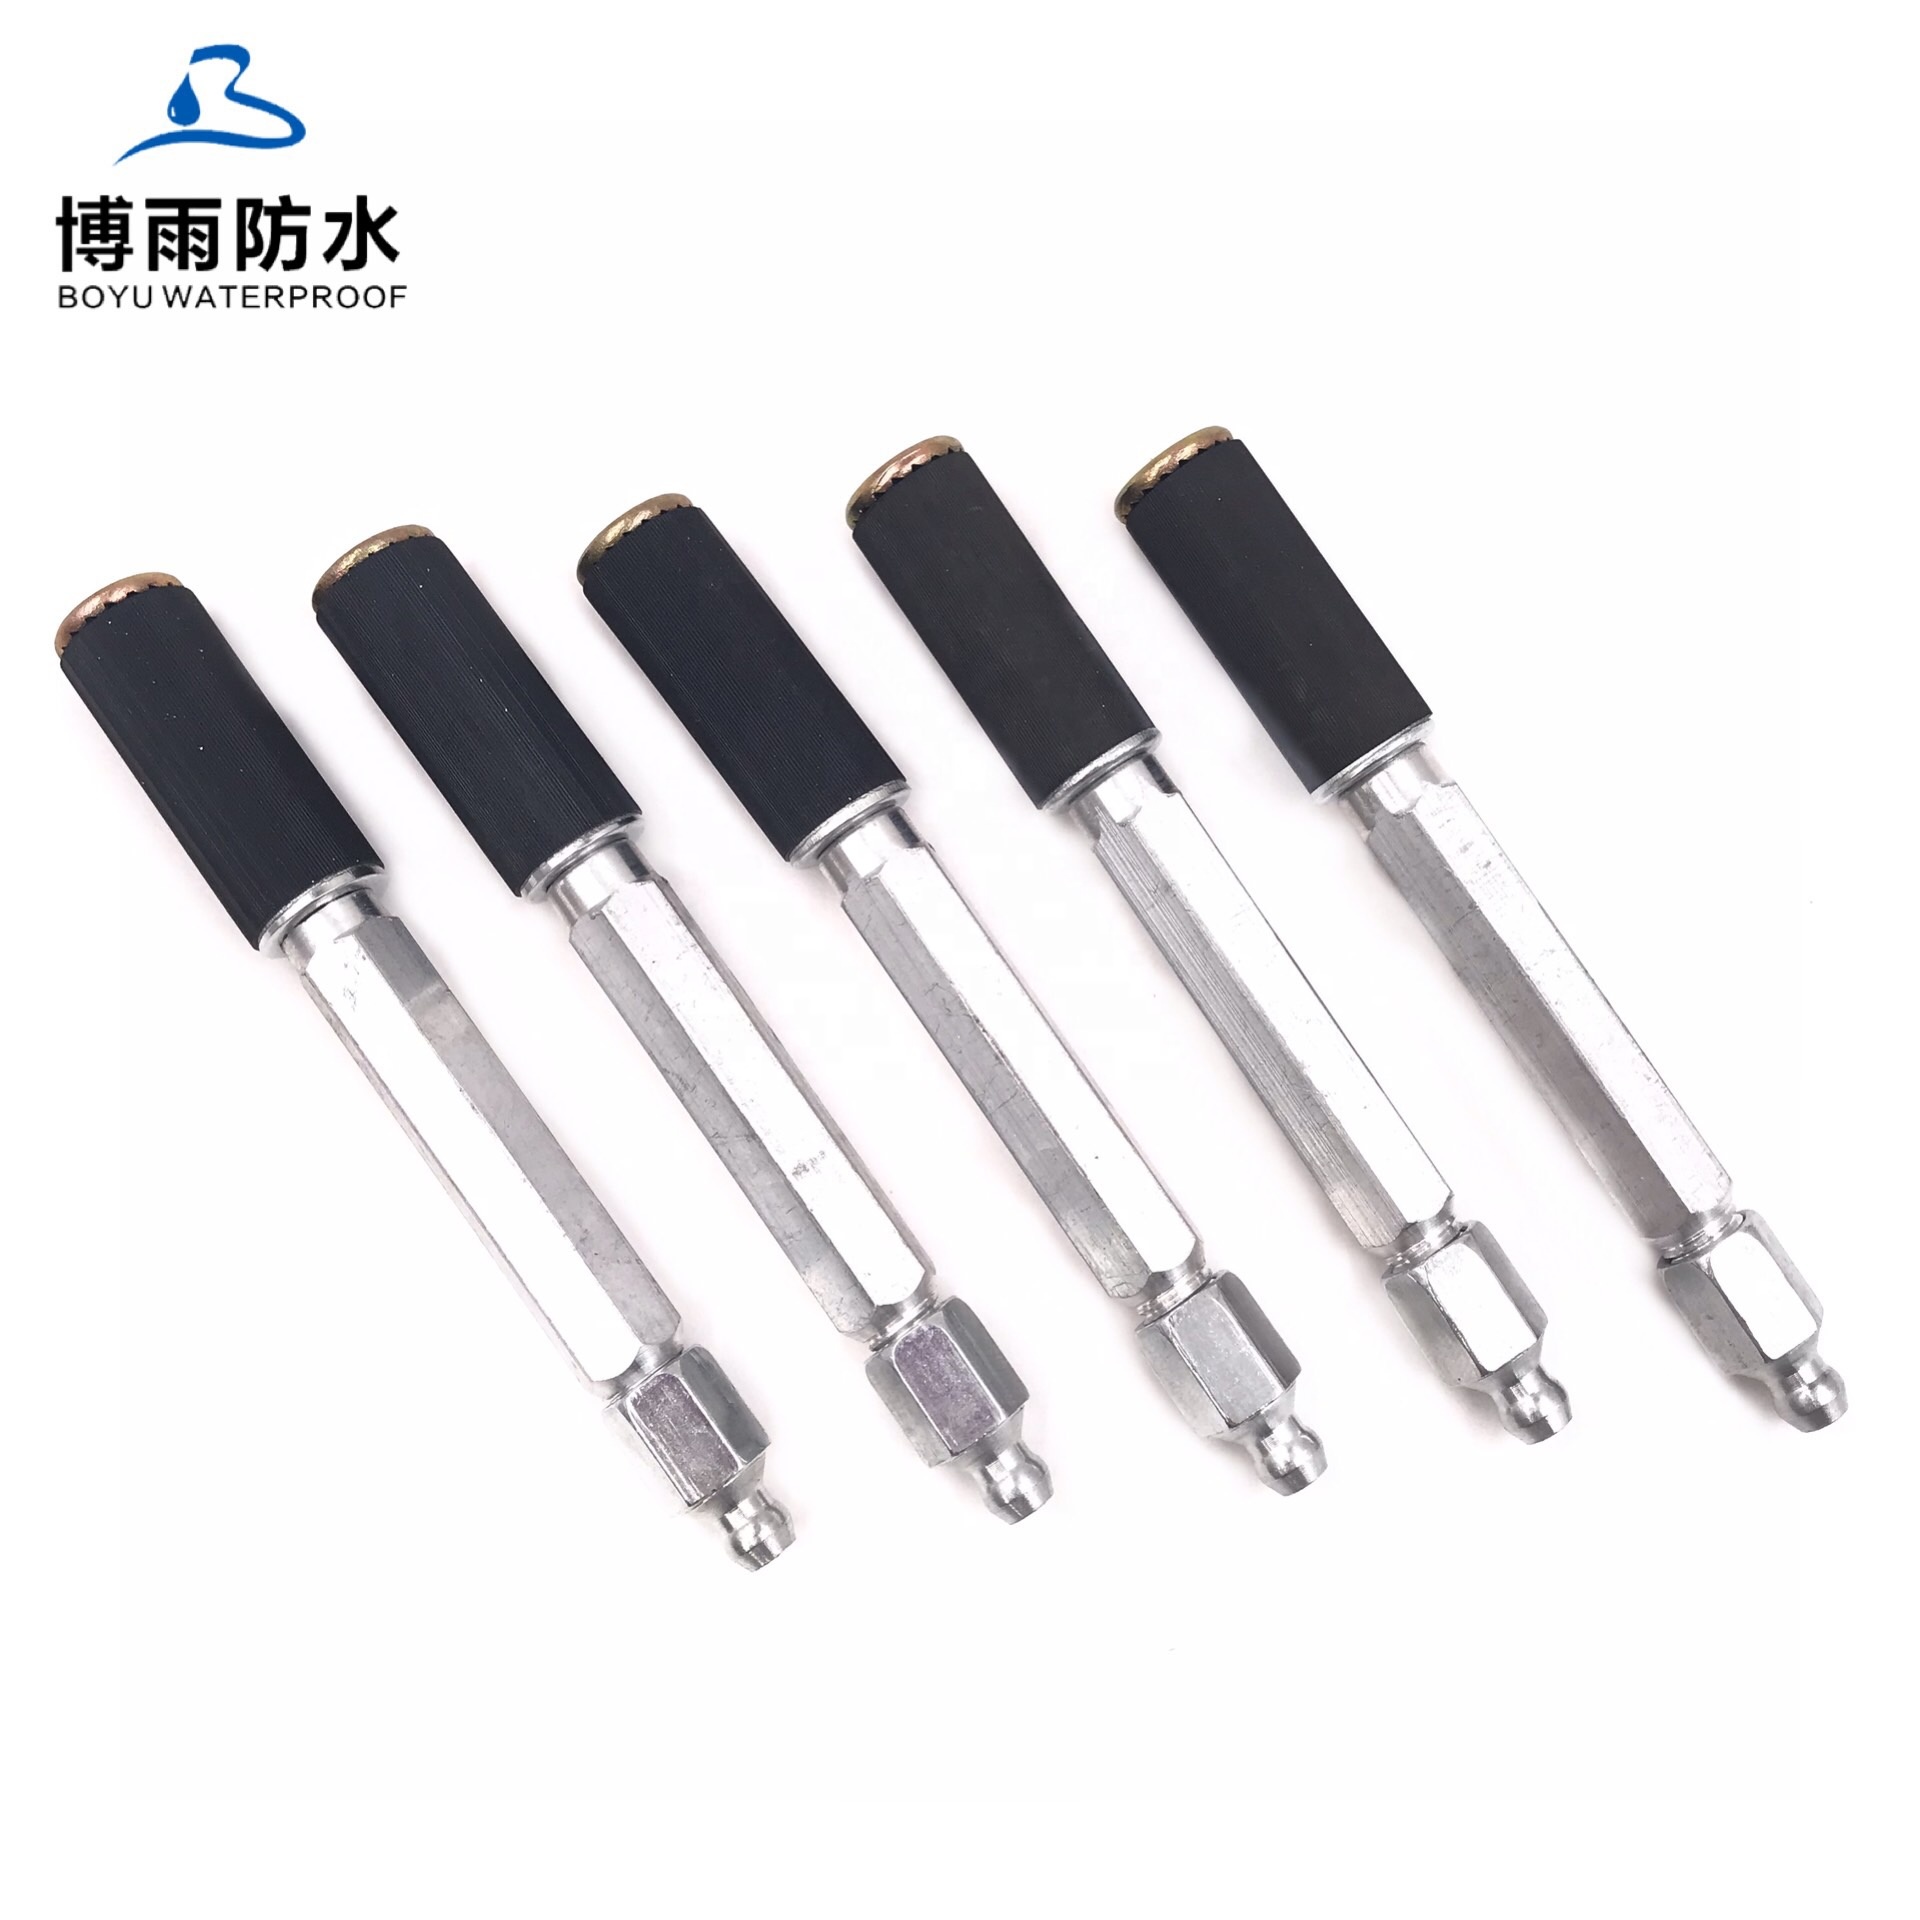 injection grouting packers steel High Pressure Aluminum A10 Grout Injection Packer